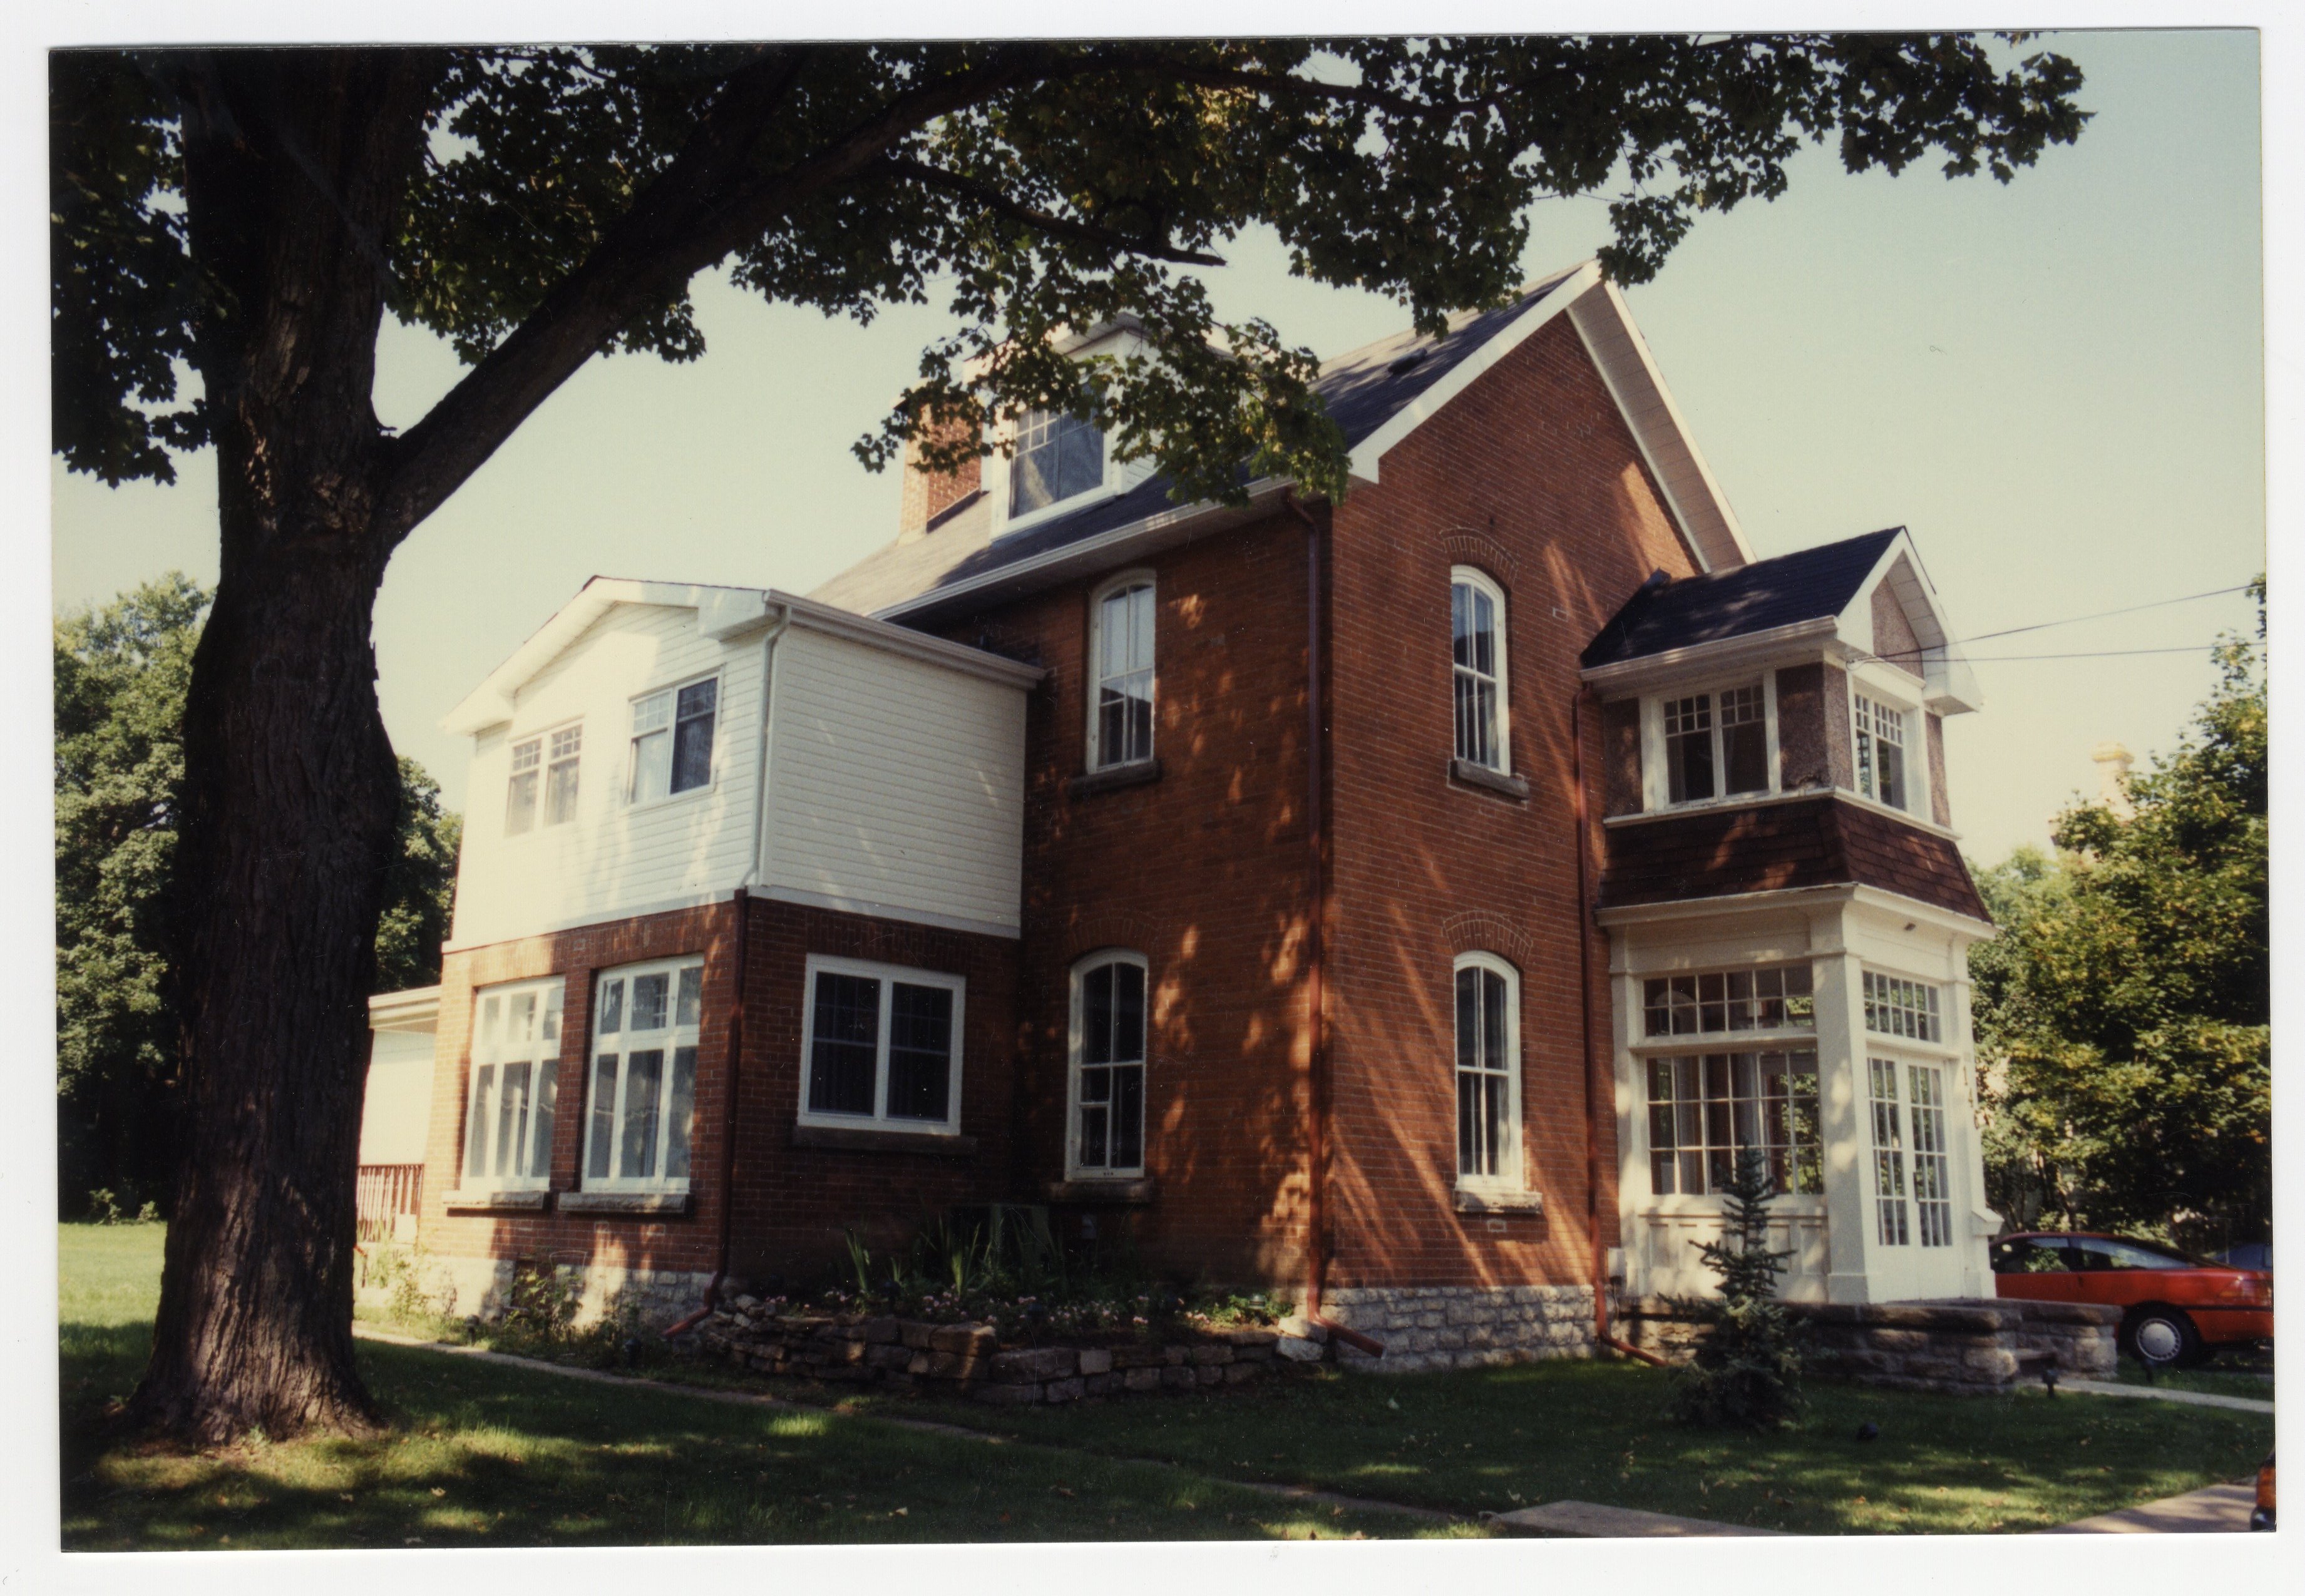 A large two and a half storey red brick house with a glassed in veranda.